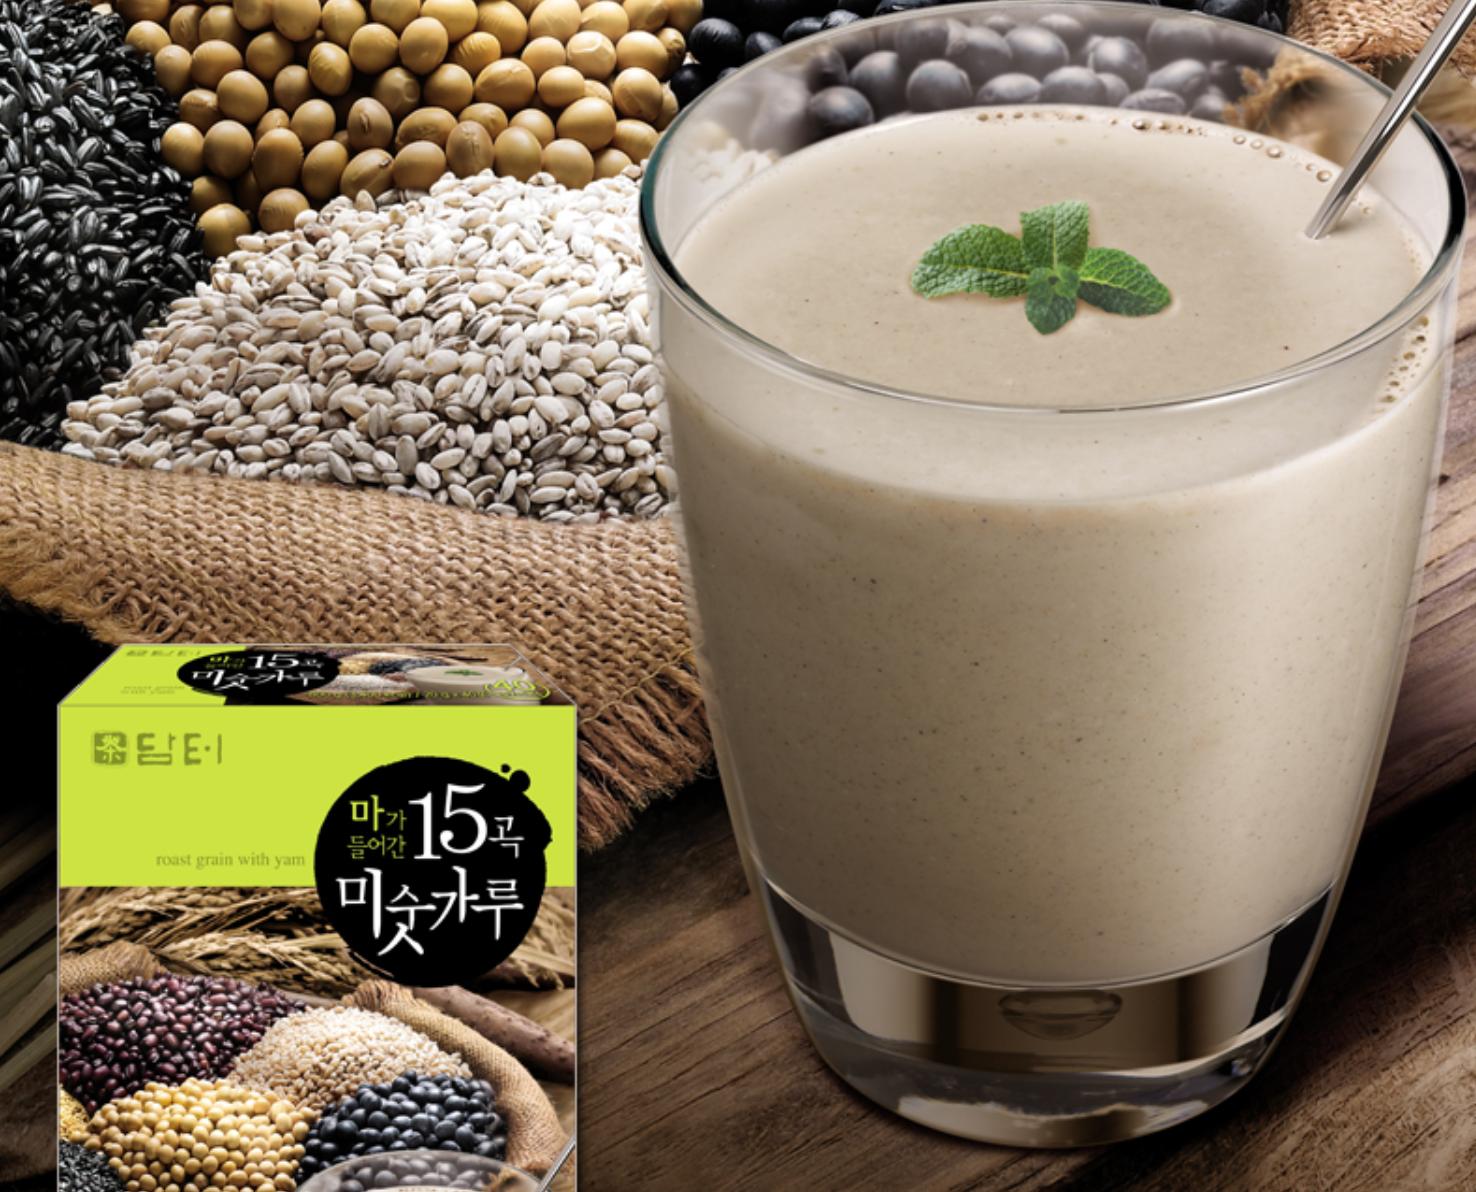 korean brand damtuh's 15 Roasted Grains Mixed Powder mixed into a drink with grains in the background 